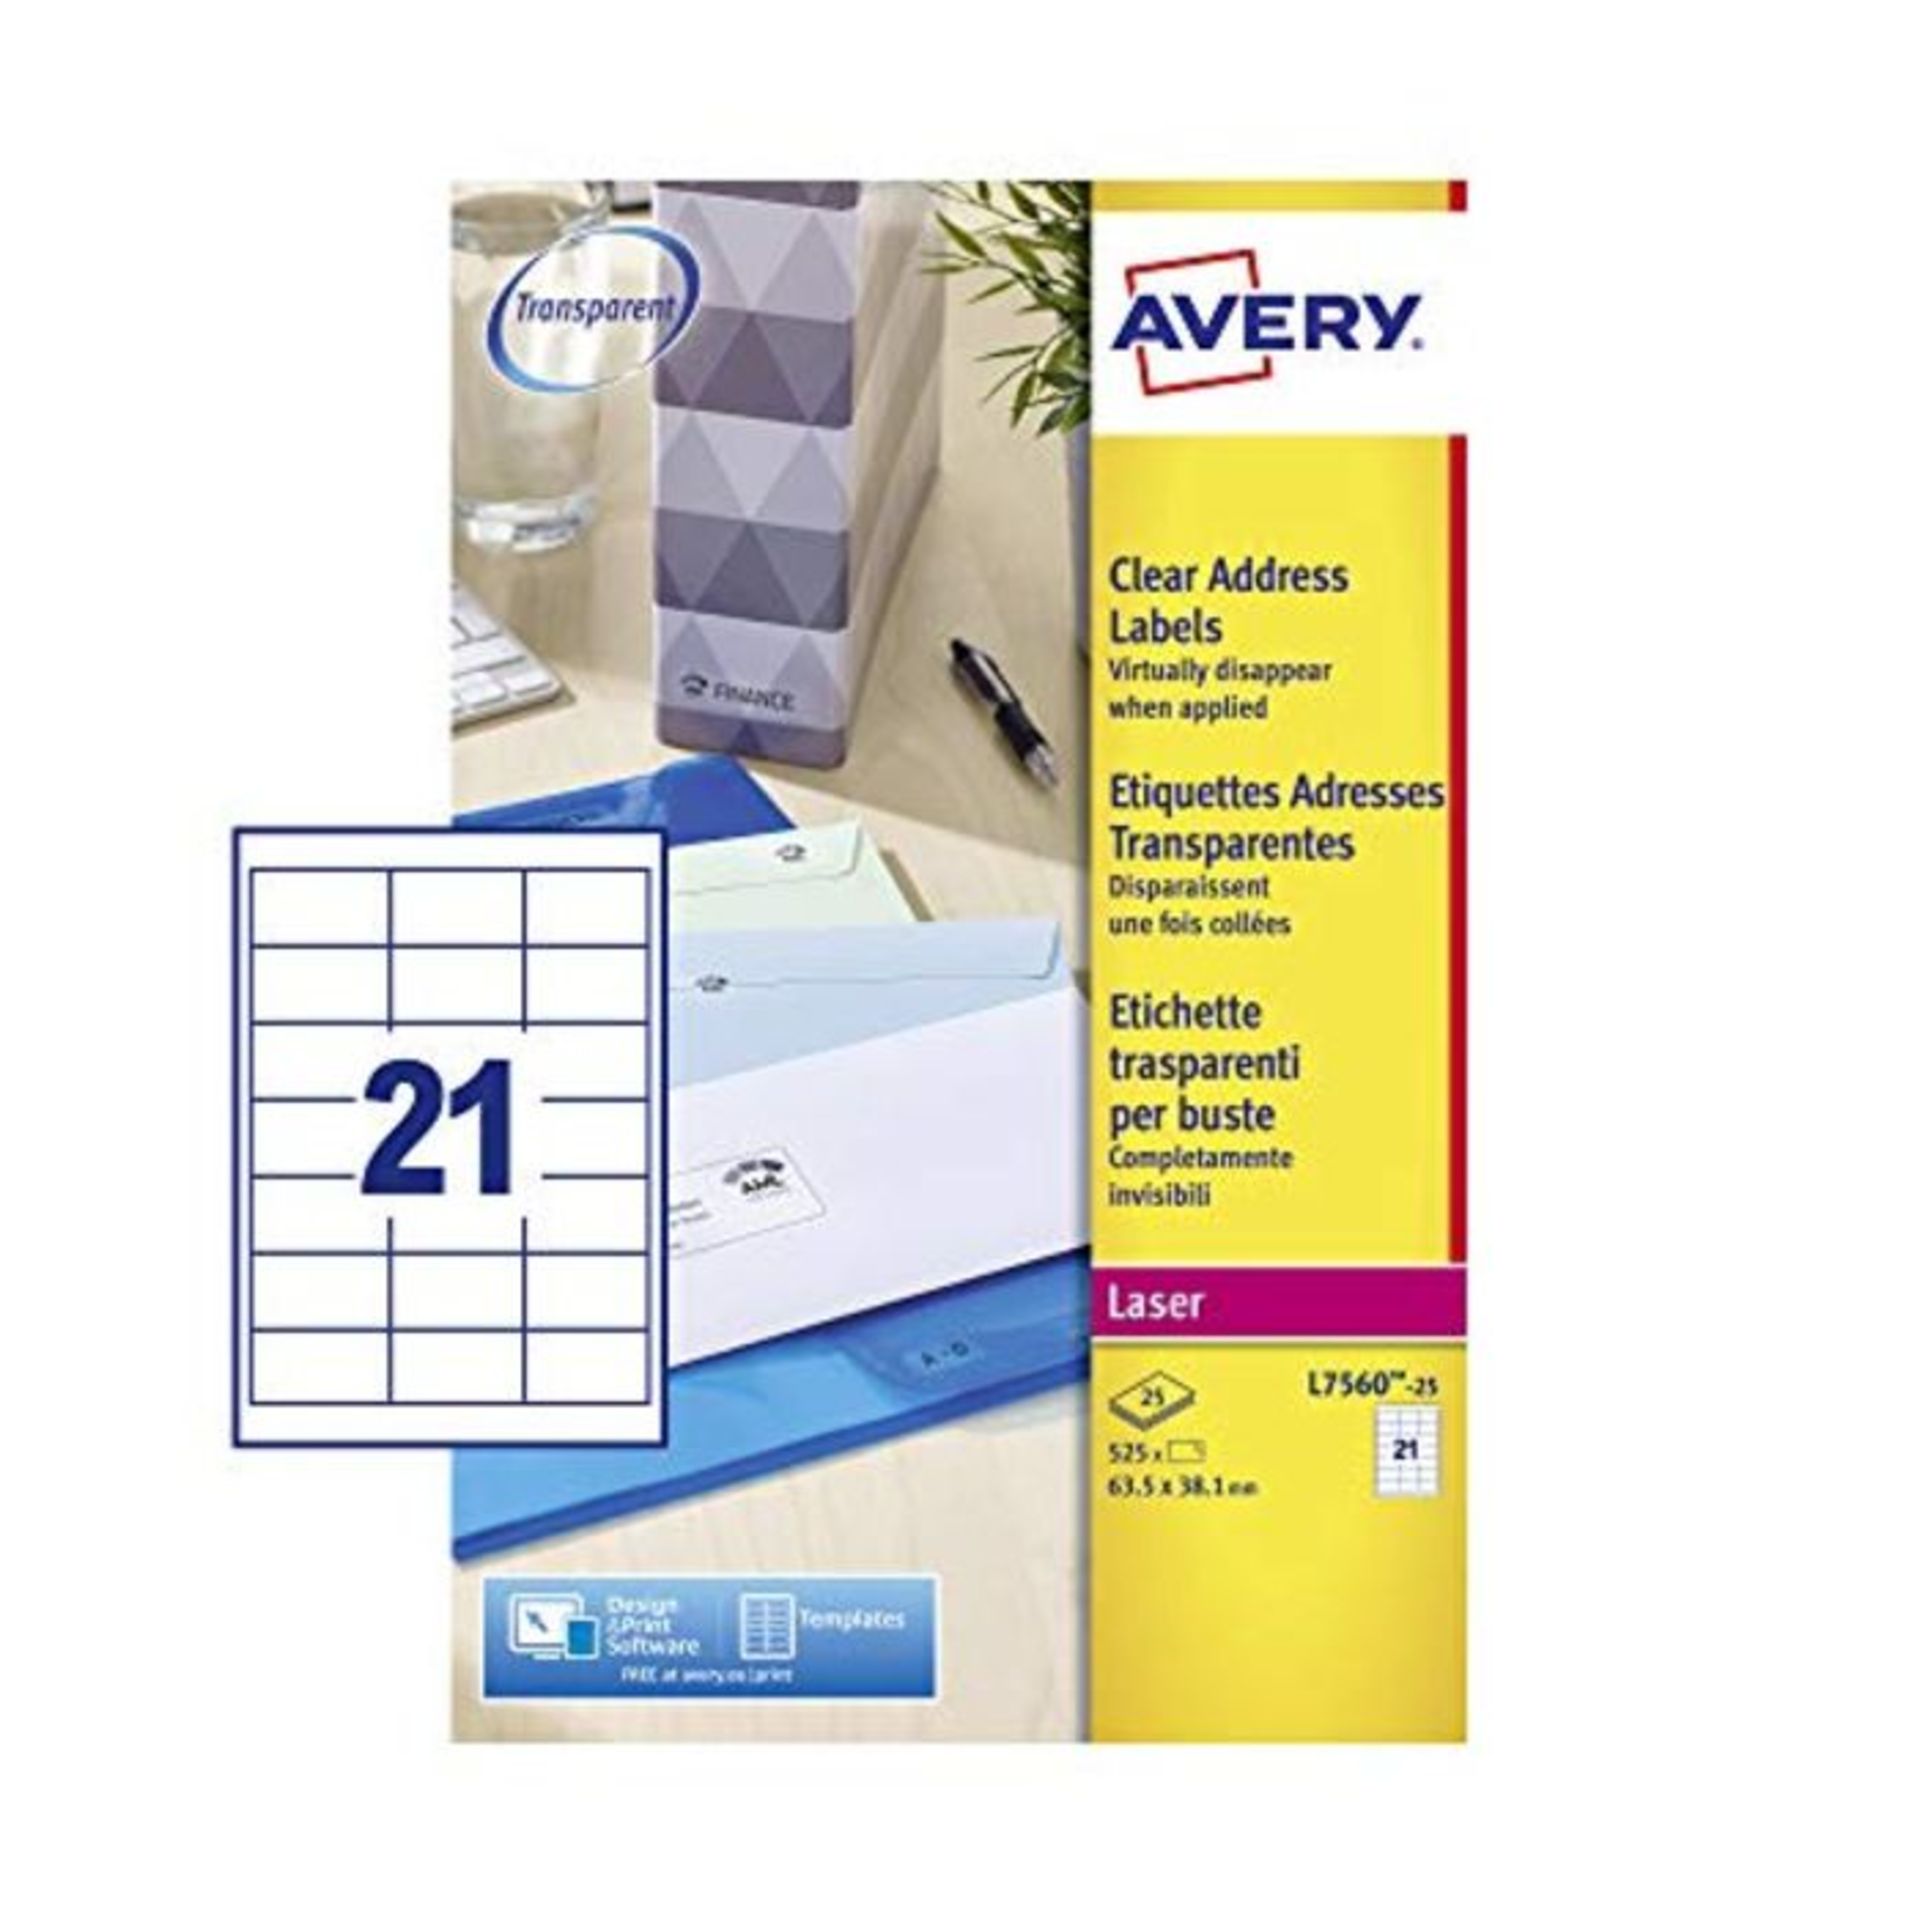 Avery Self Adhesive Clear Address Mailing Labels, Laser Printers, 21 Labels Per A4 She